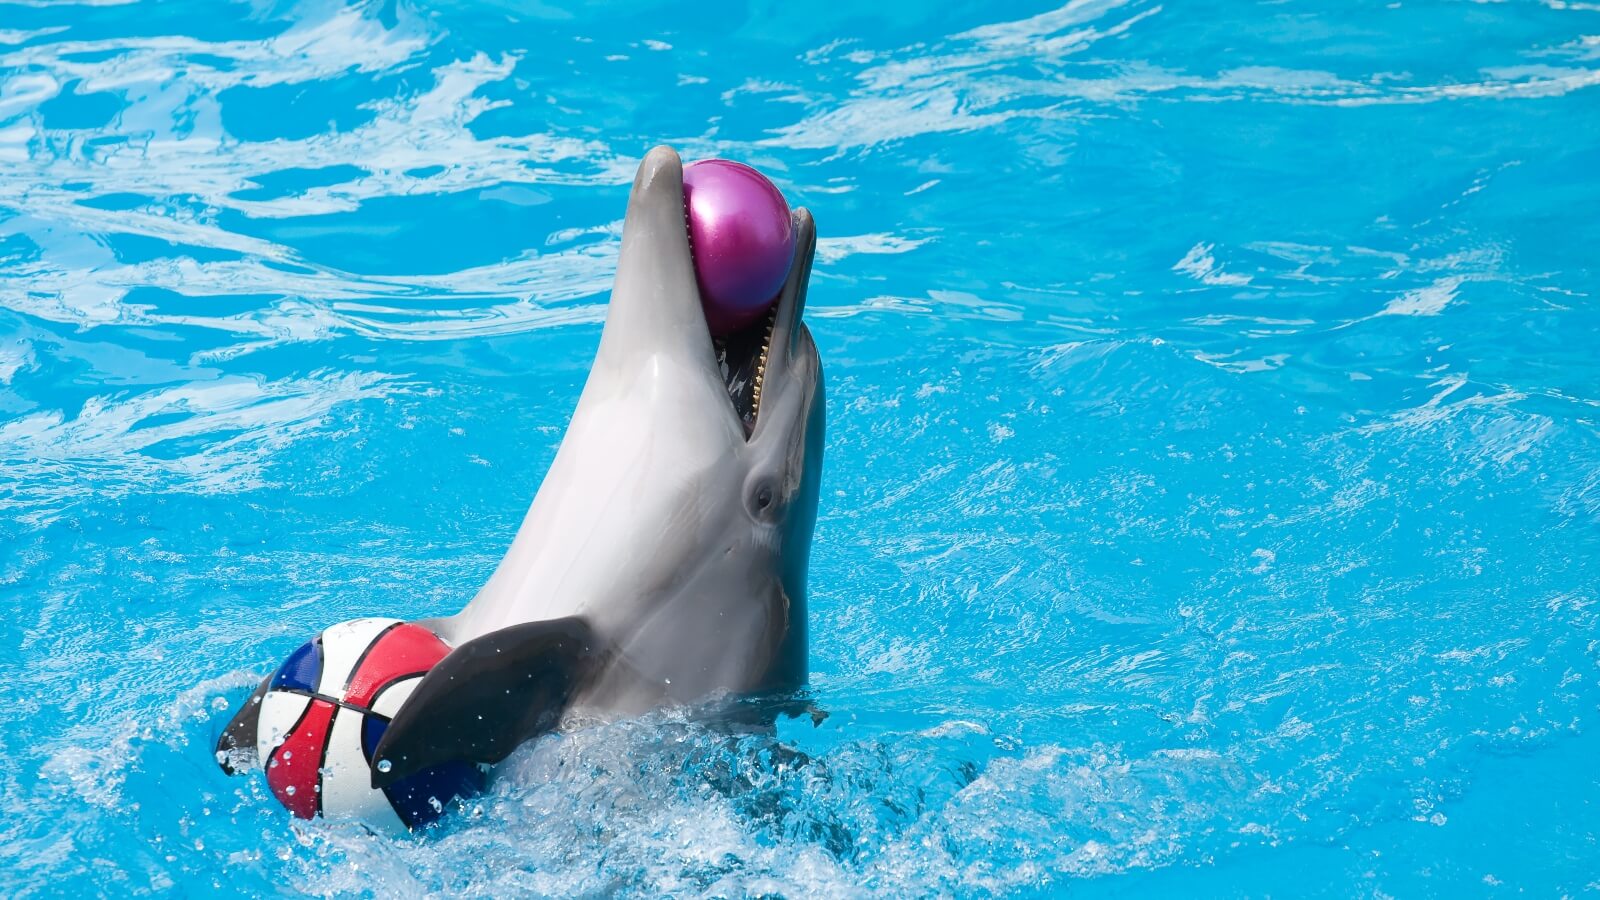 Leading Travel Company Expedia Bans Dolphin And Whale Shows